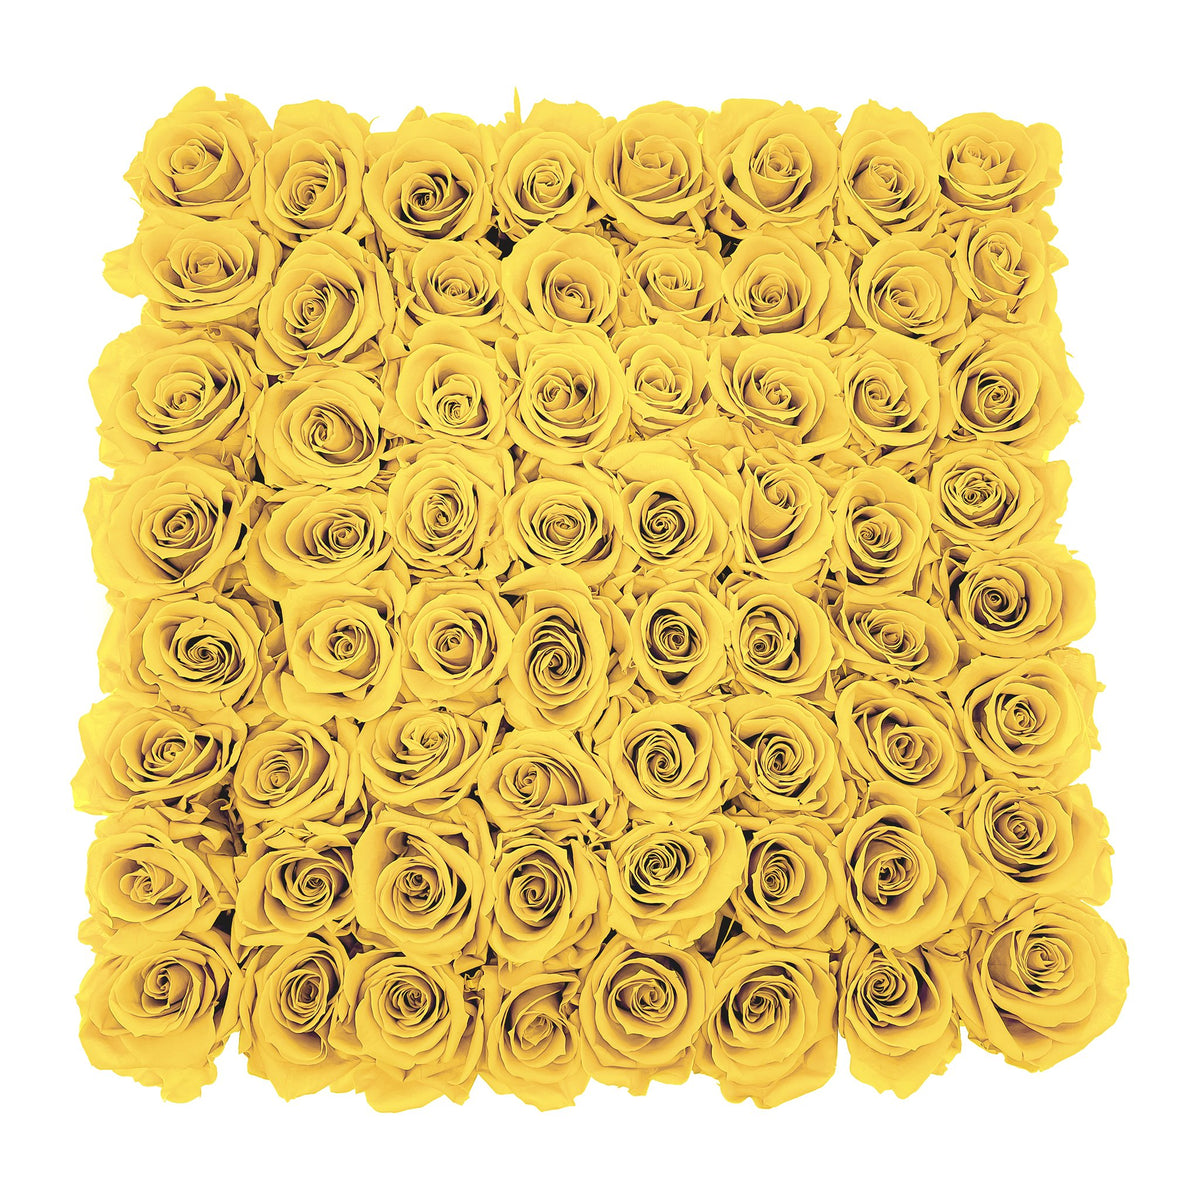 Preserved Roses Large Box | Bright Yellow - Roses